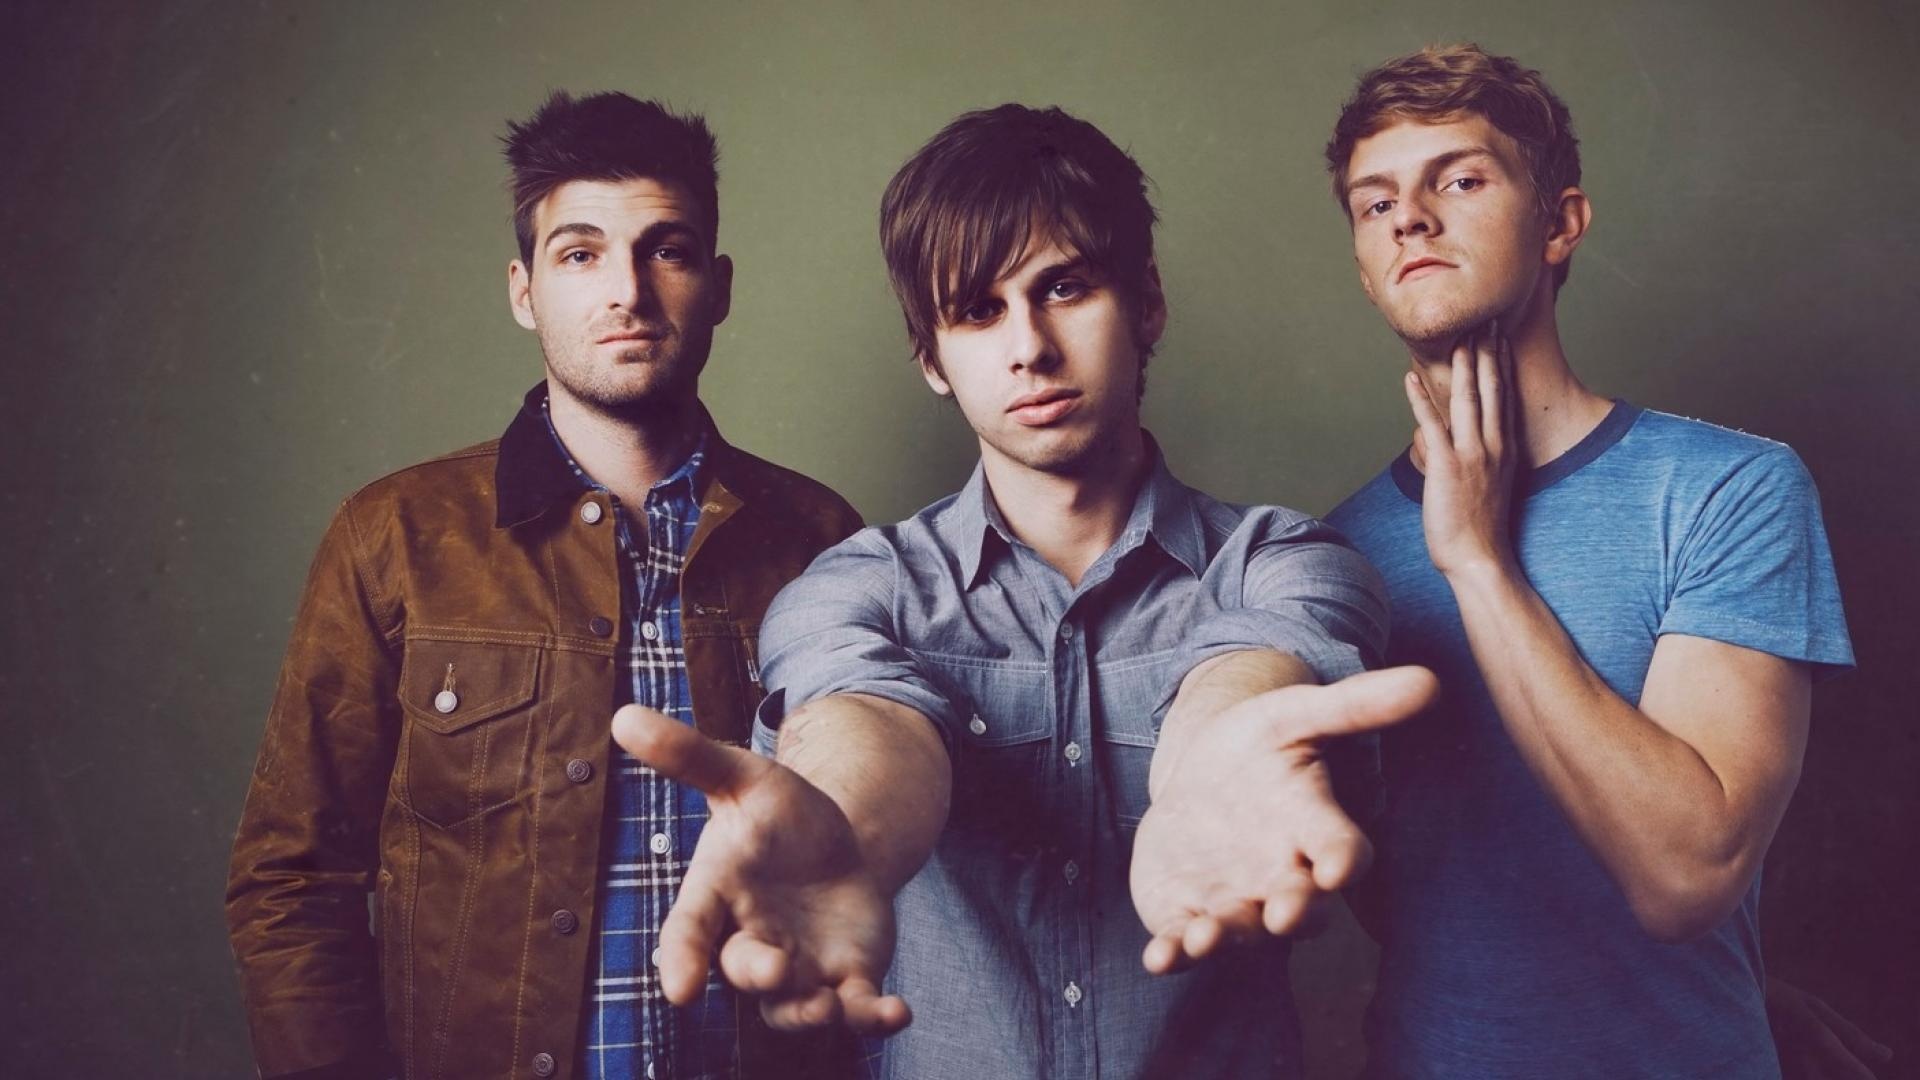 Foster The People, Band wallpapers, Indie music, Cool vibe, 1920x1080 Full HD Desktop